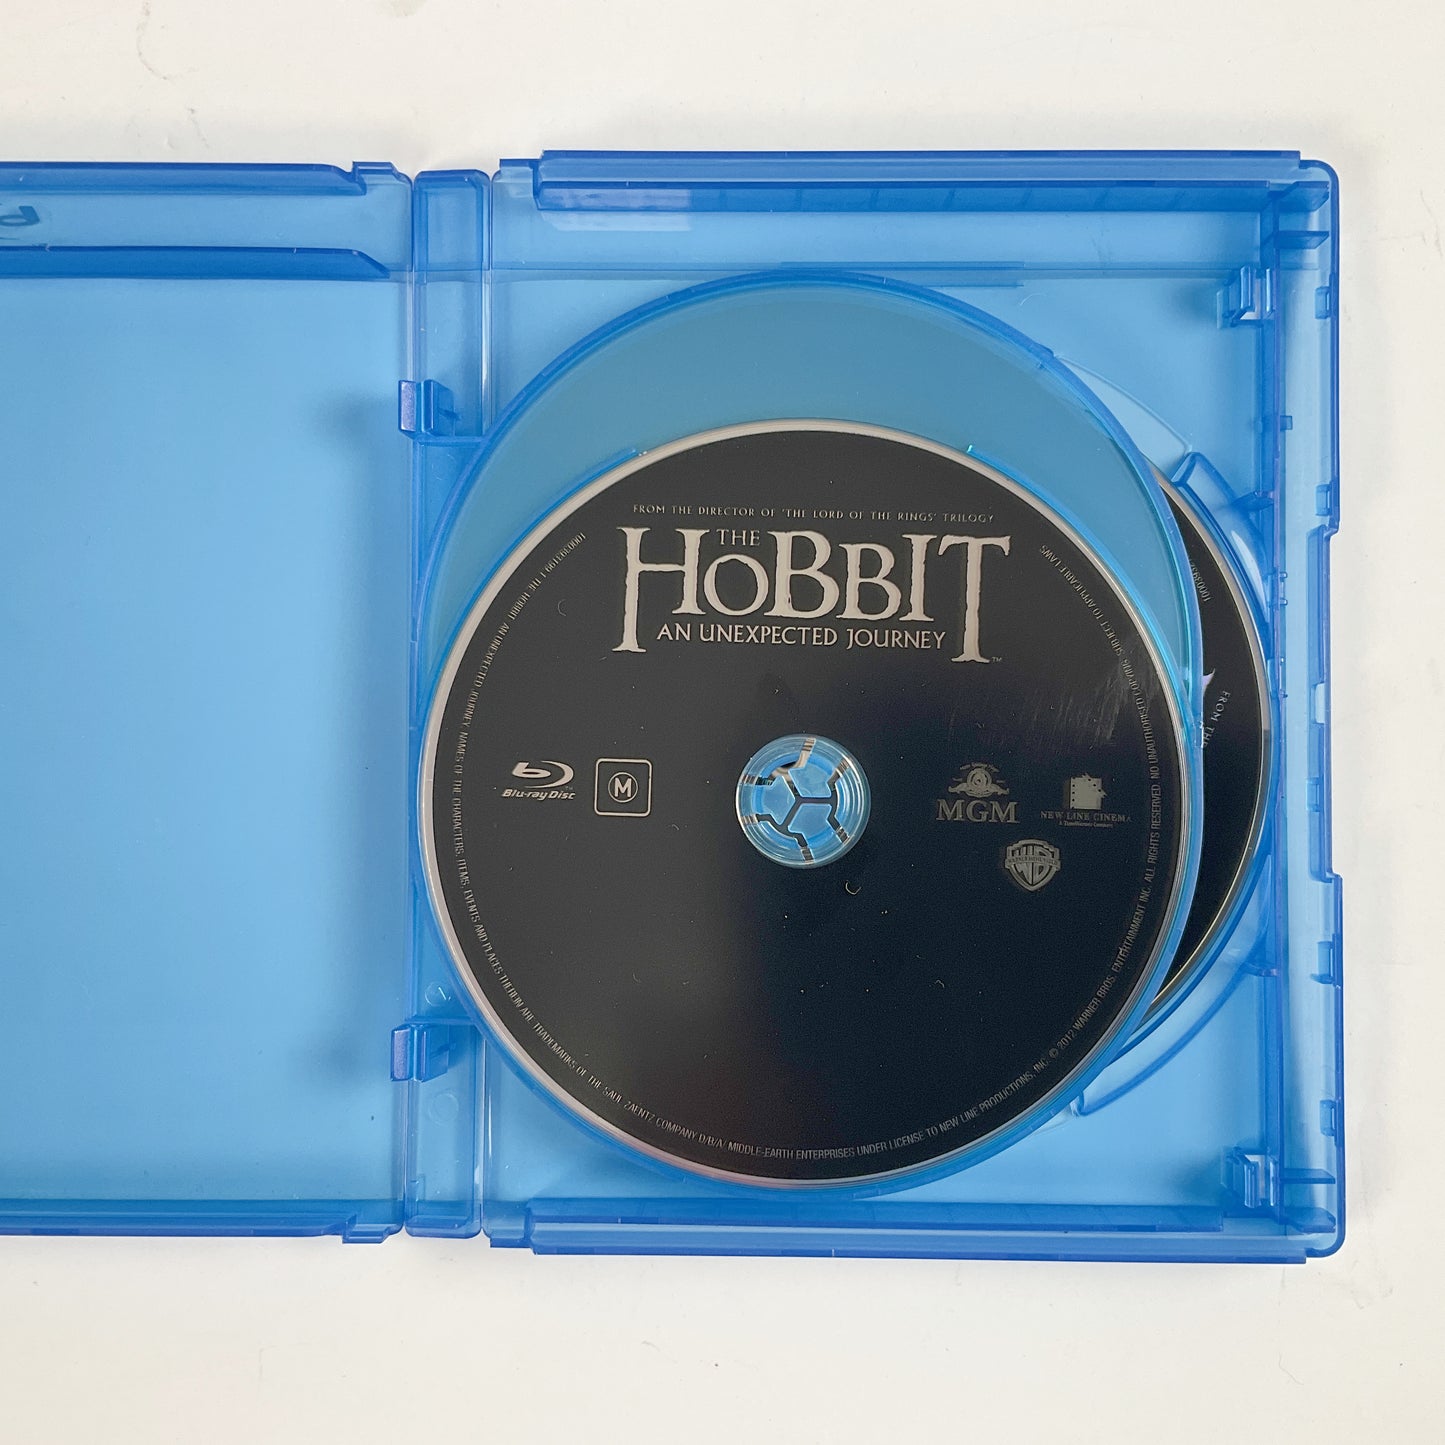 The Hobbit - An Unexpected Journey Blu-ray & DVD